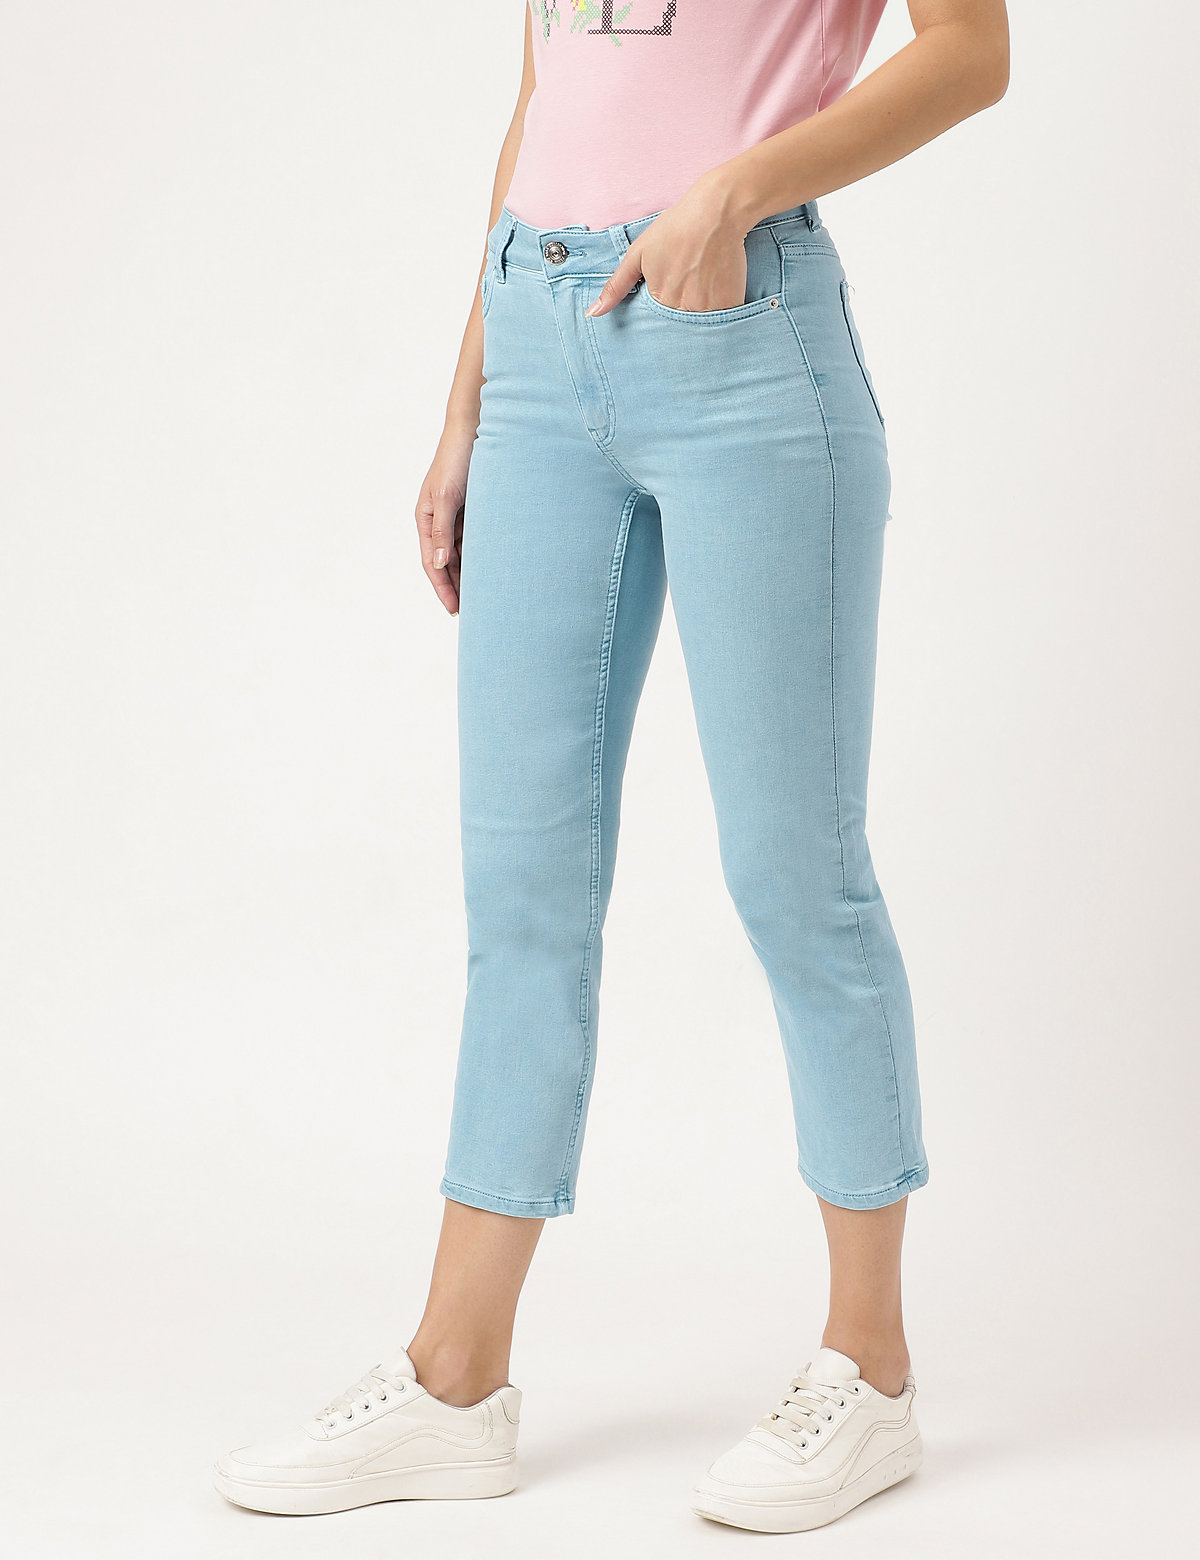 Cropped High Waist Button Front Jeans